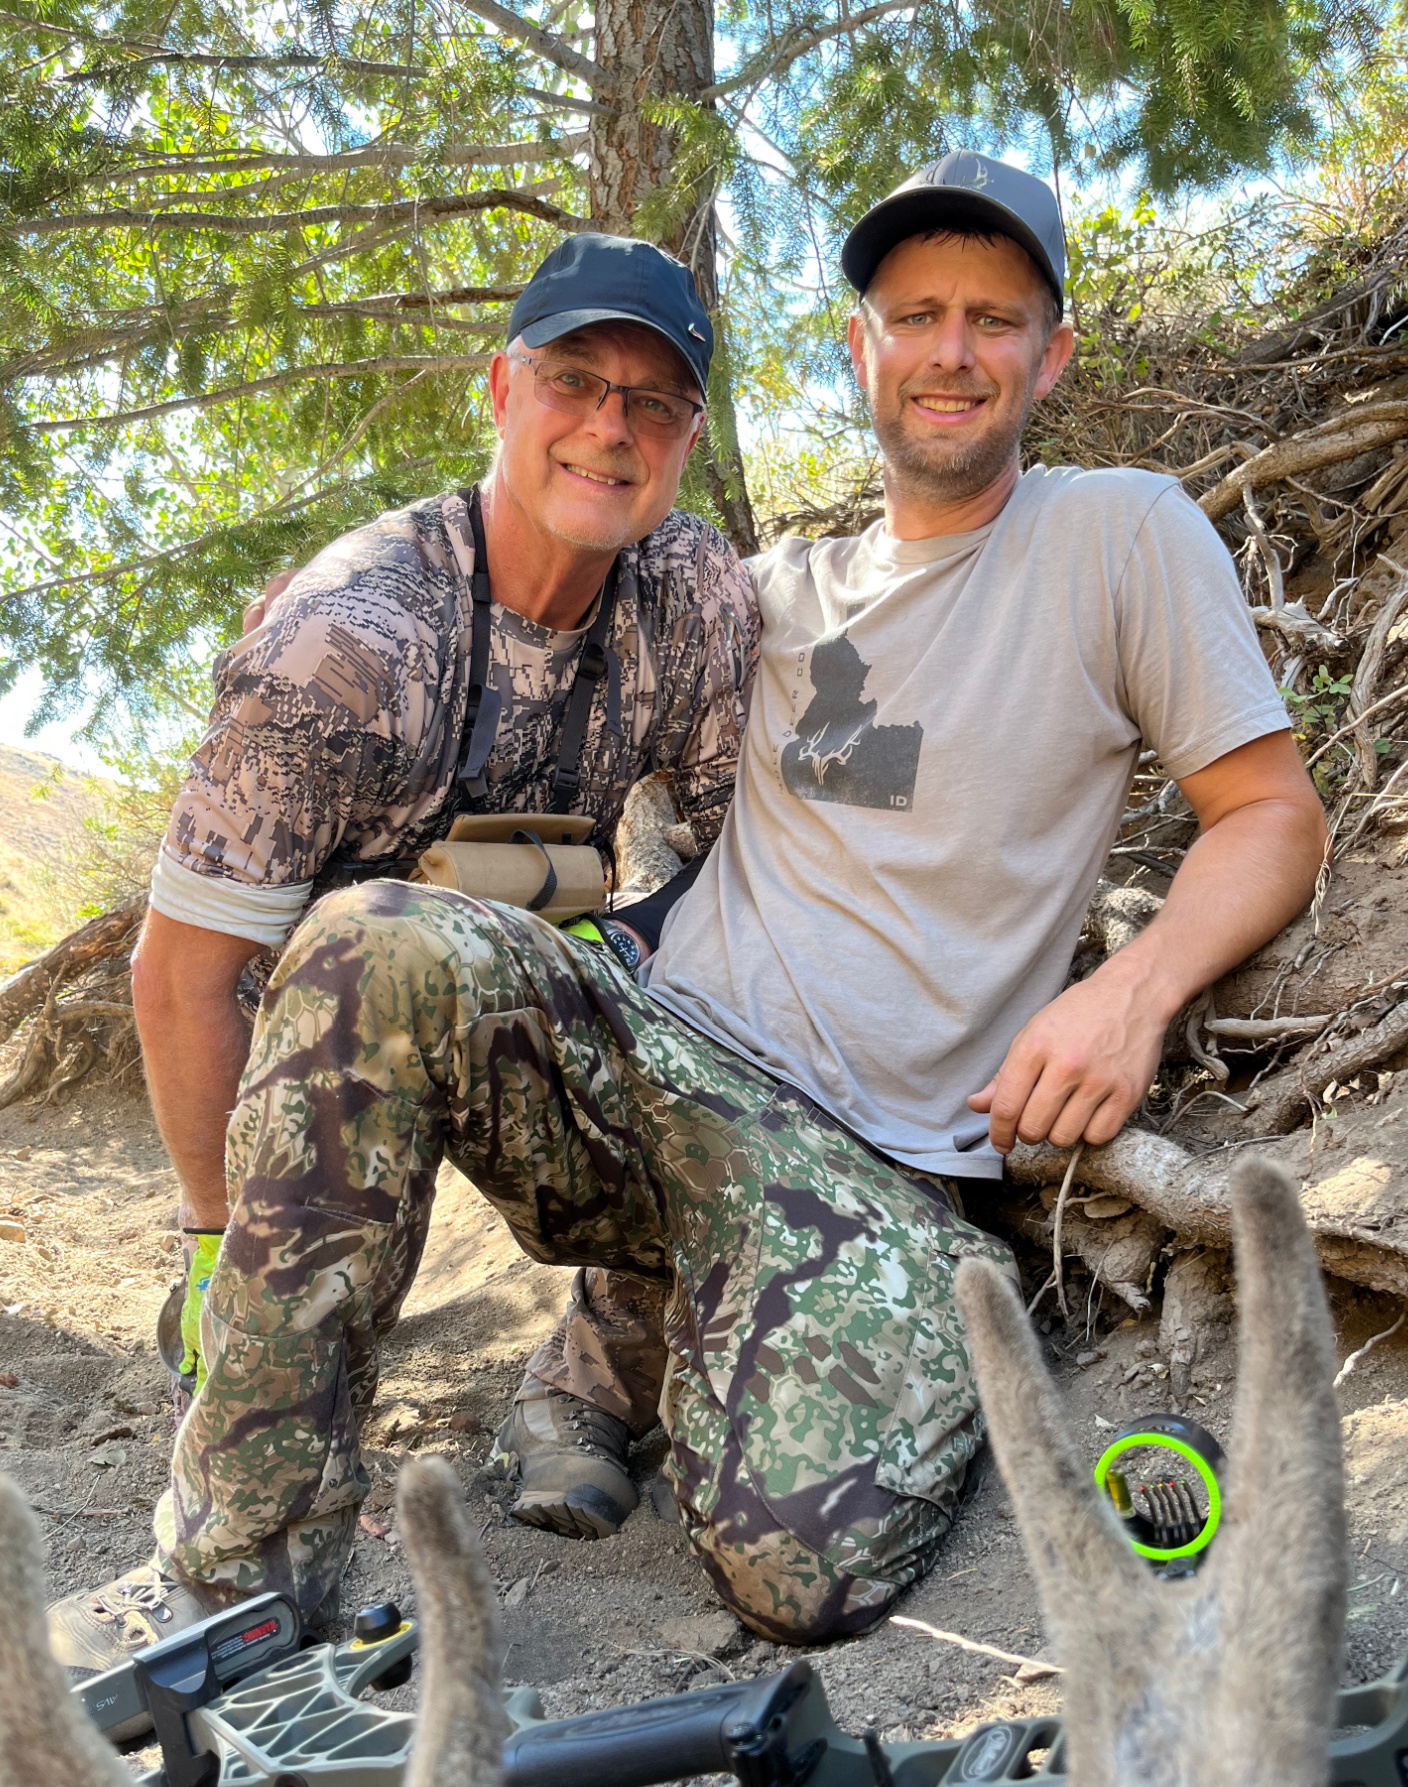 Sid (left) was ecstatic for his son, who persevered through tough circumstances to harvest this buck. Via Taylor NieldSid was ecstatic for his son, who persevered through tough circumstances to harvest this buck.